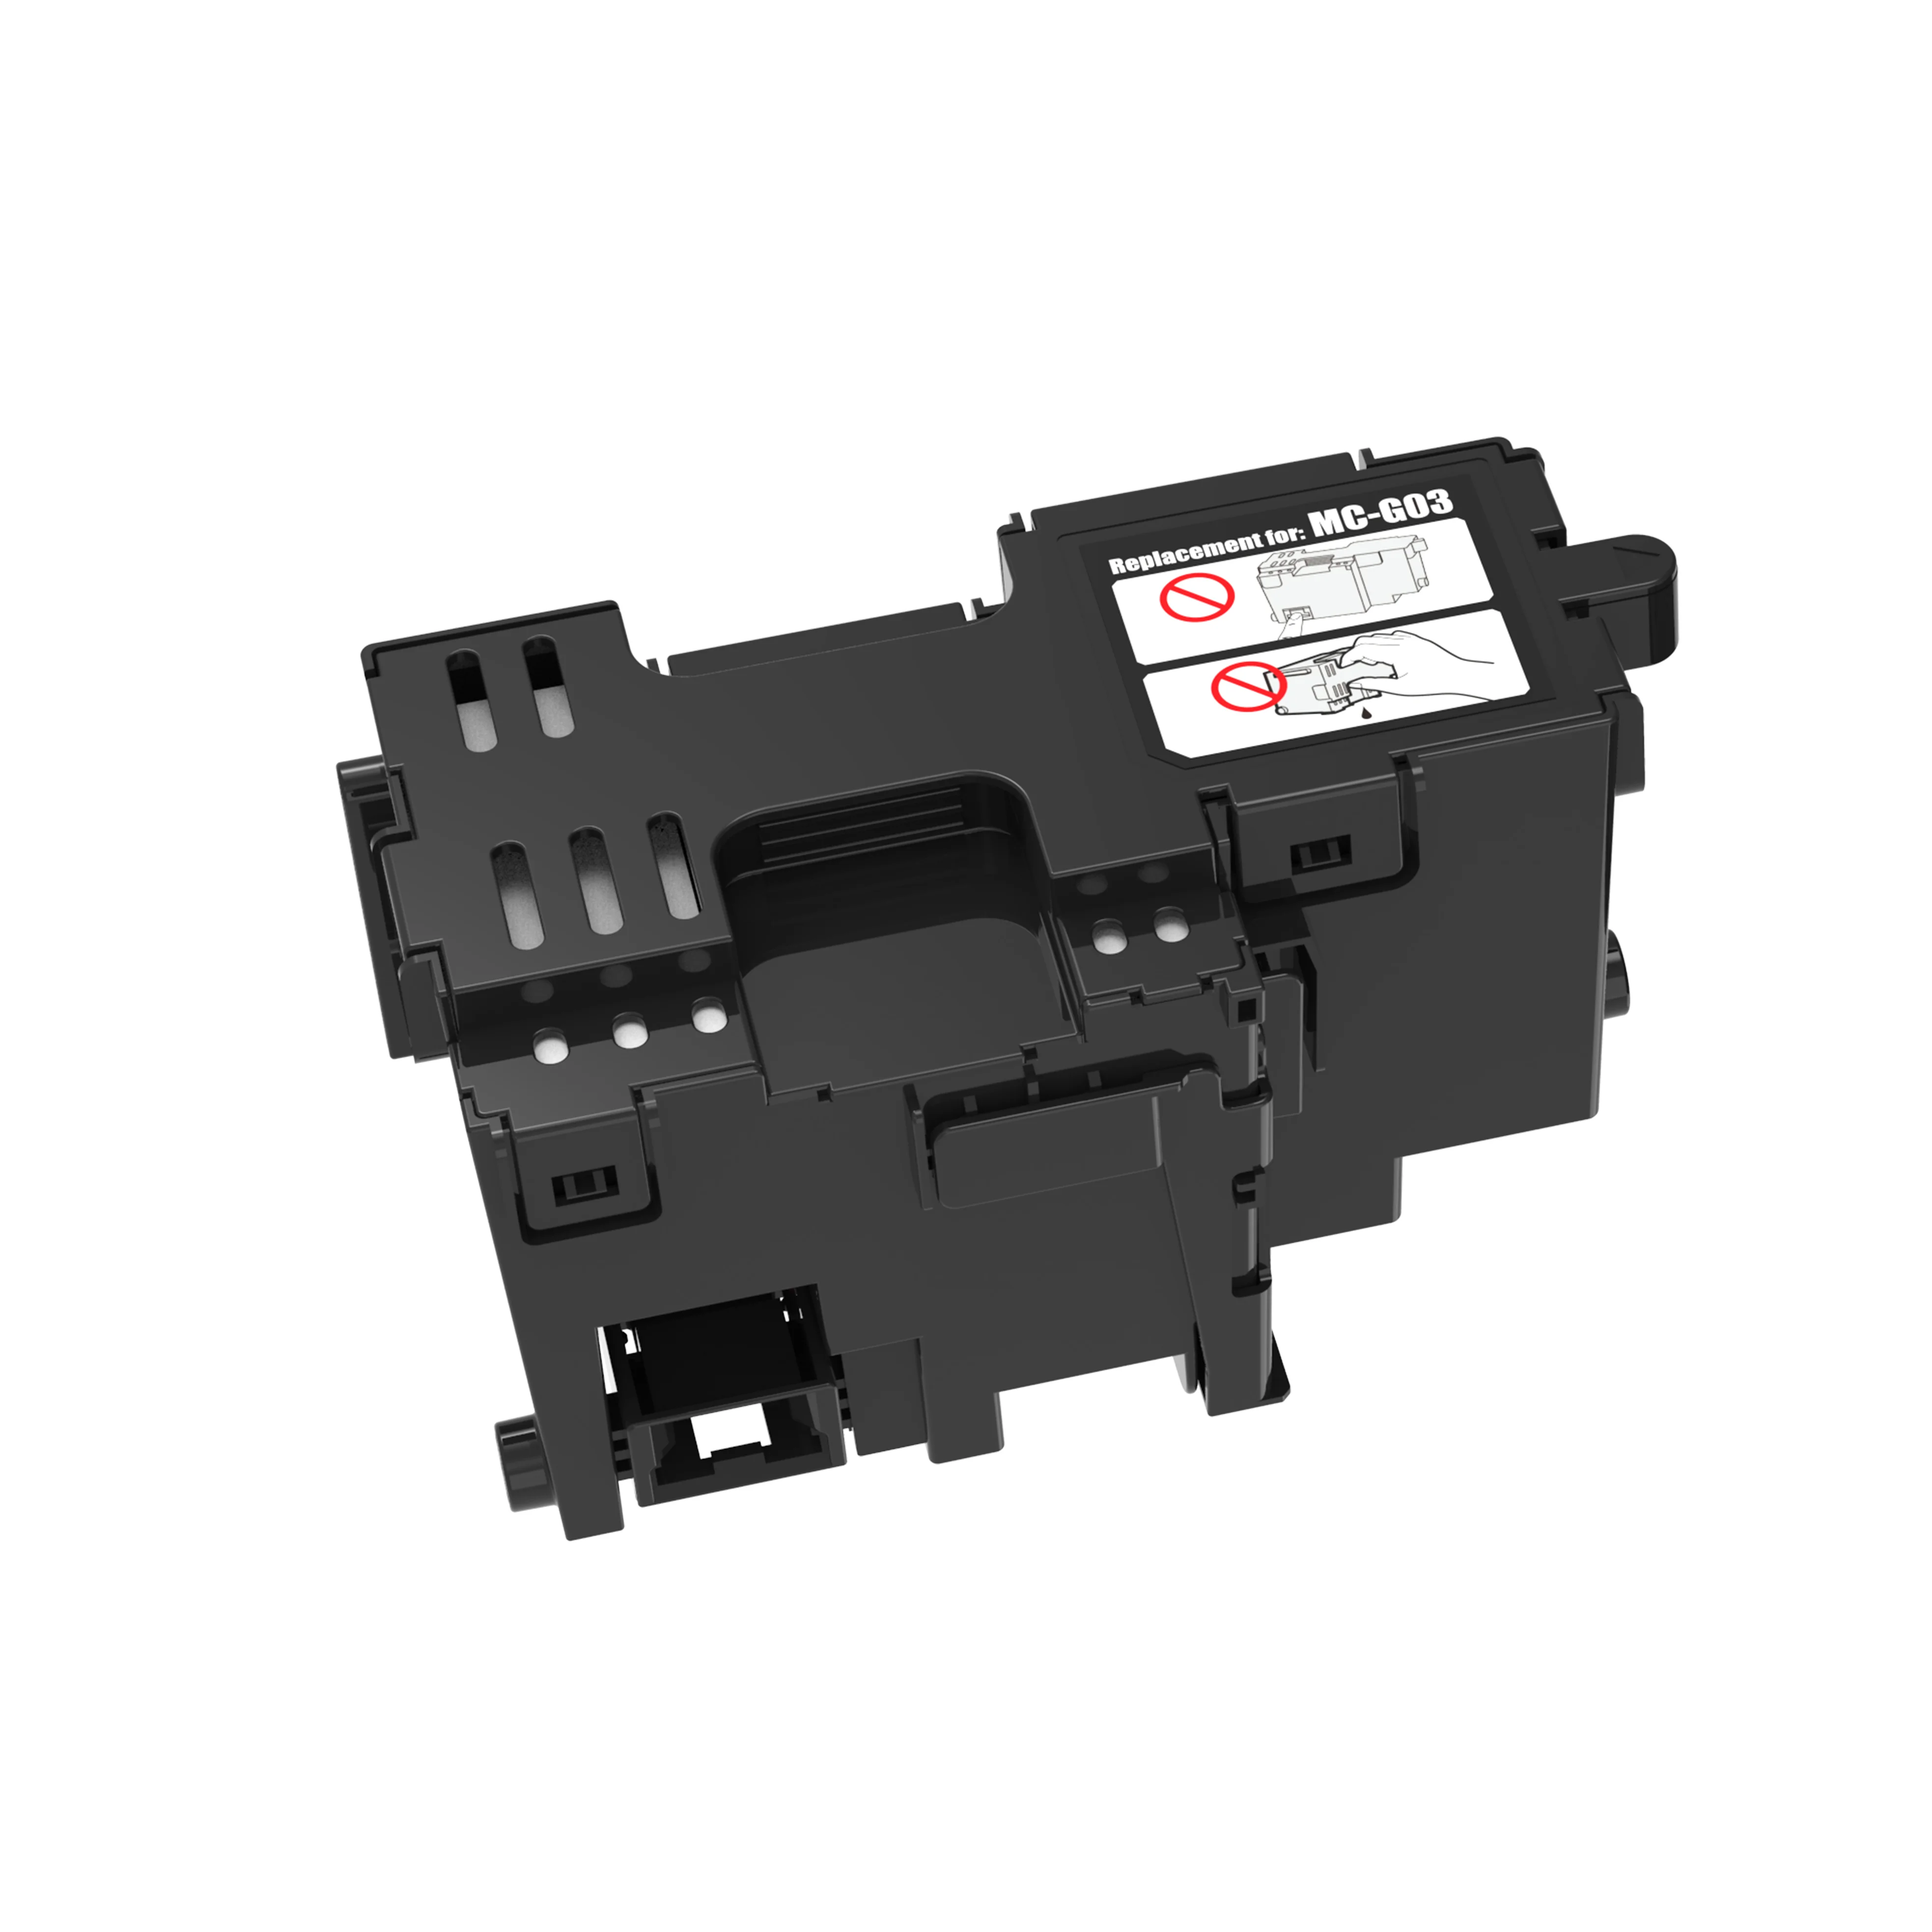 MC-G03 Compatible Maintenance tank with chip for Canon MAXIFY GX3010 GX4010 GX3020 GX4020 GX4030 GX3040 GX4040 GX3050 GX4050 etc